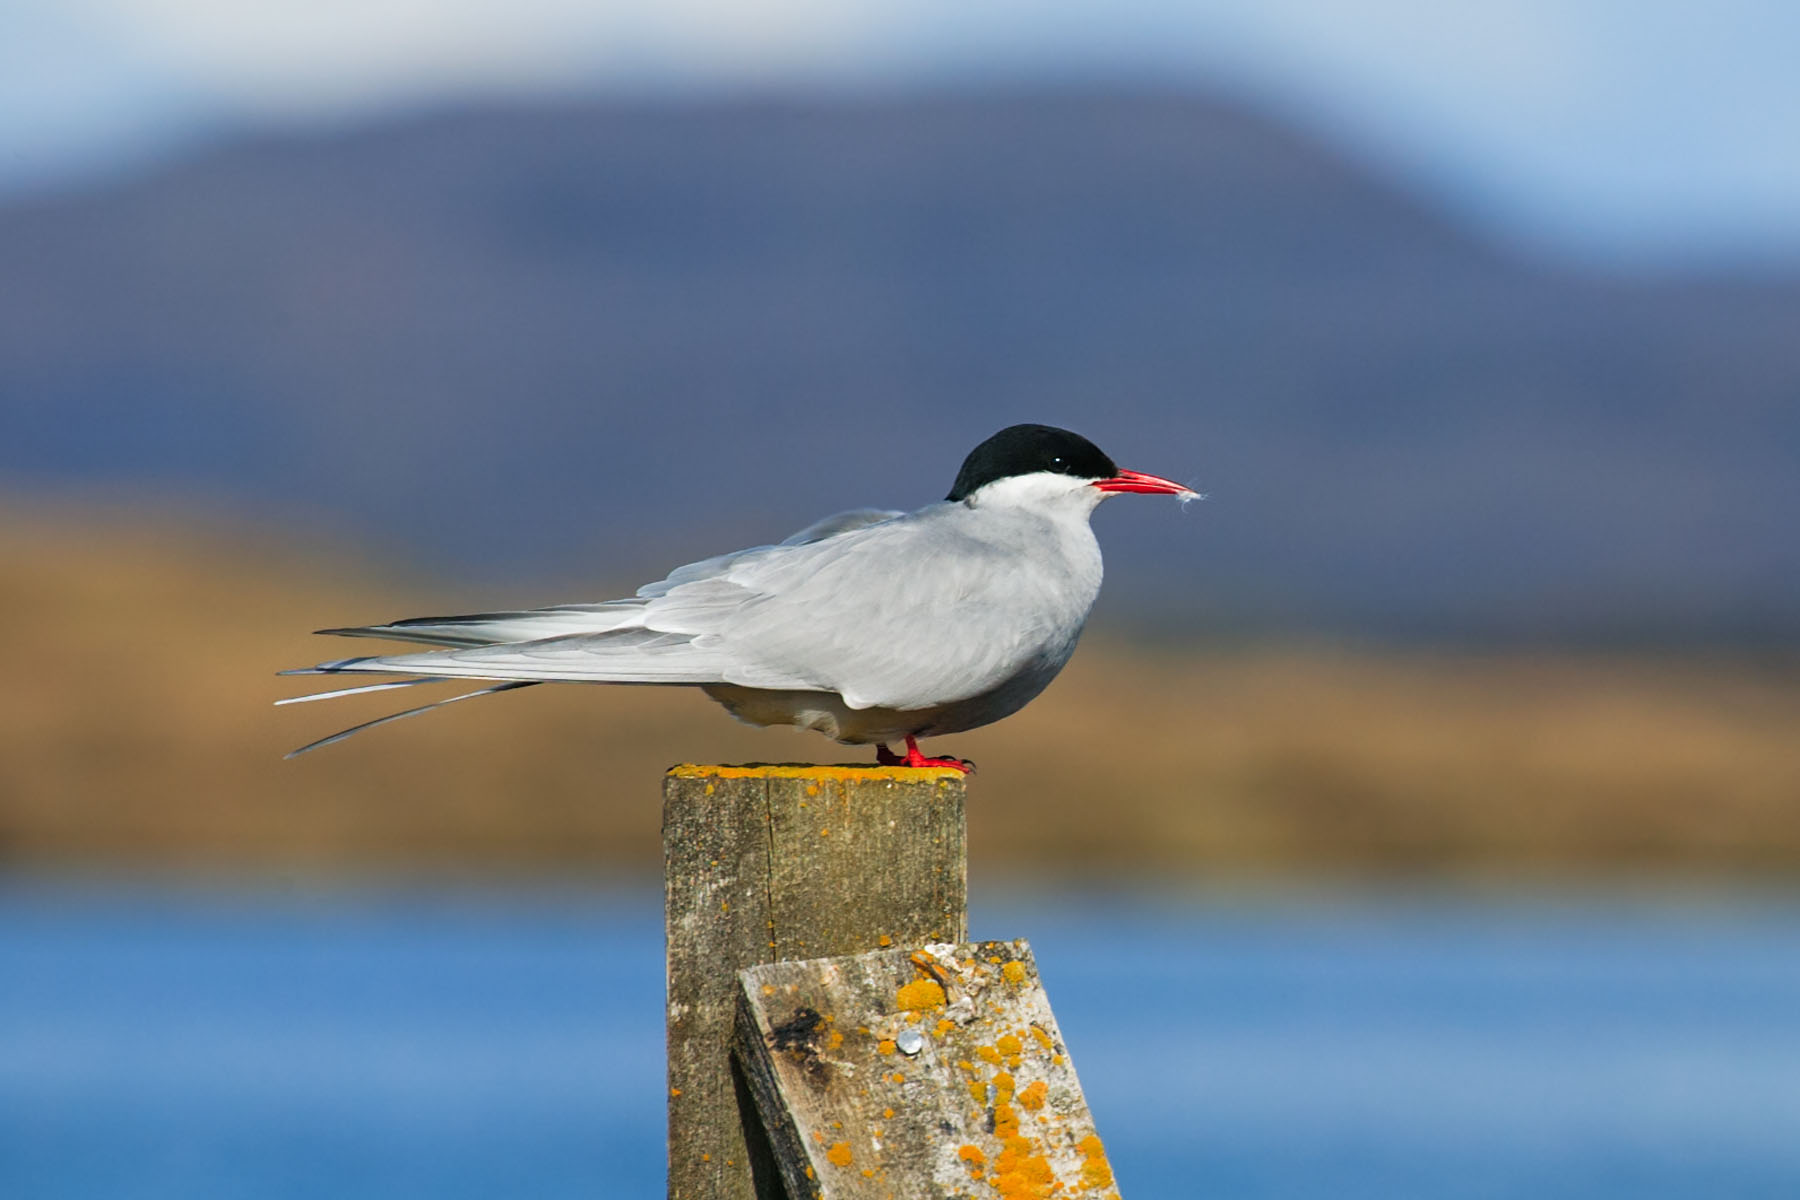 An Artic Tern on a fencepost near Myvatn, Iceland.  Click for next photo.